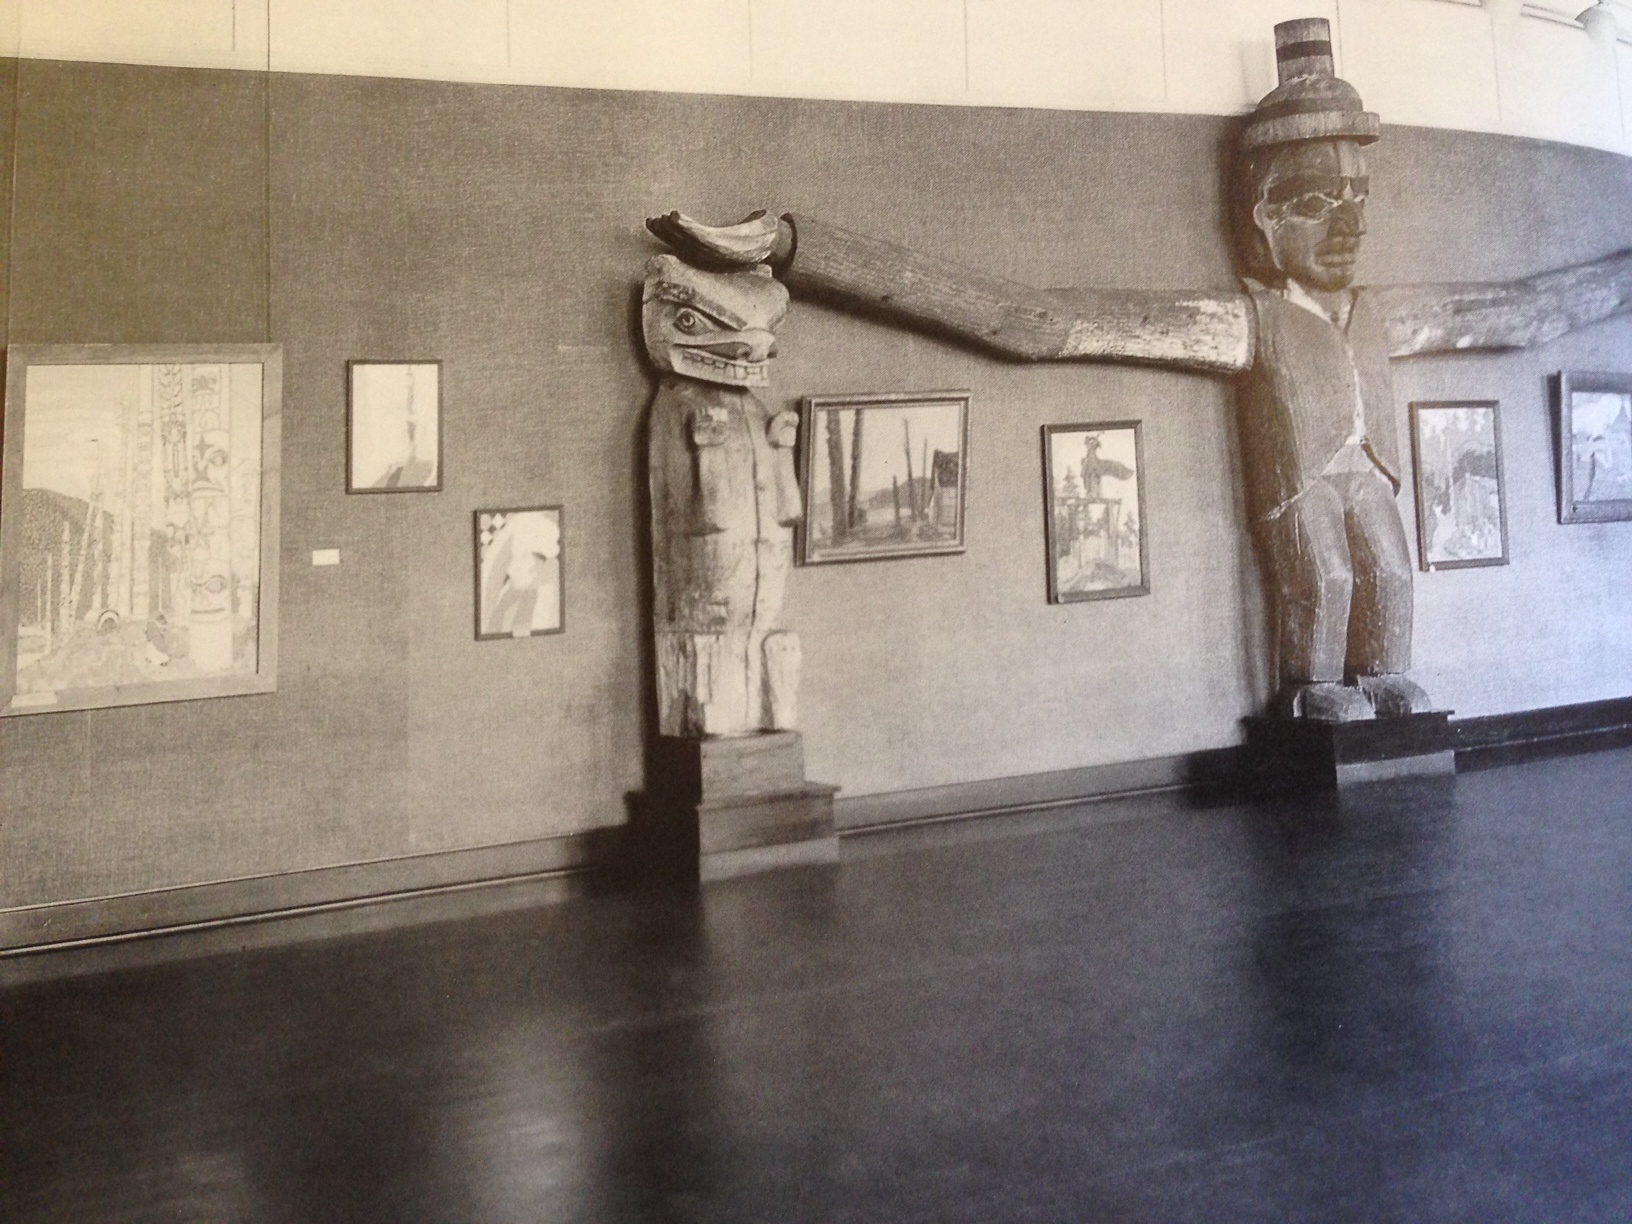 A reproduction of the photo from the 1927 exhibition, 